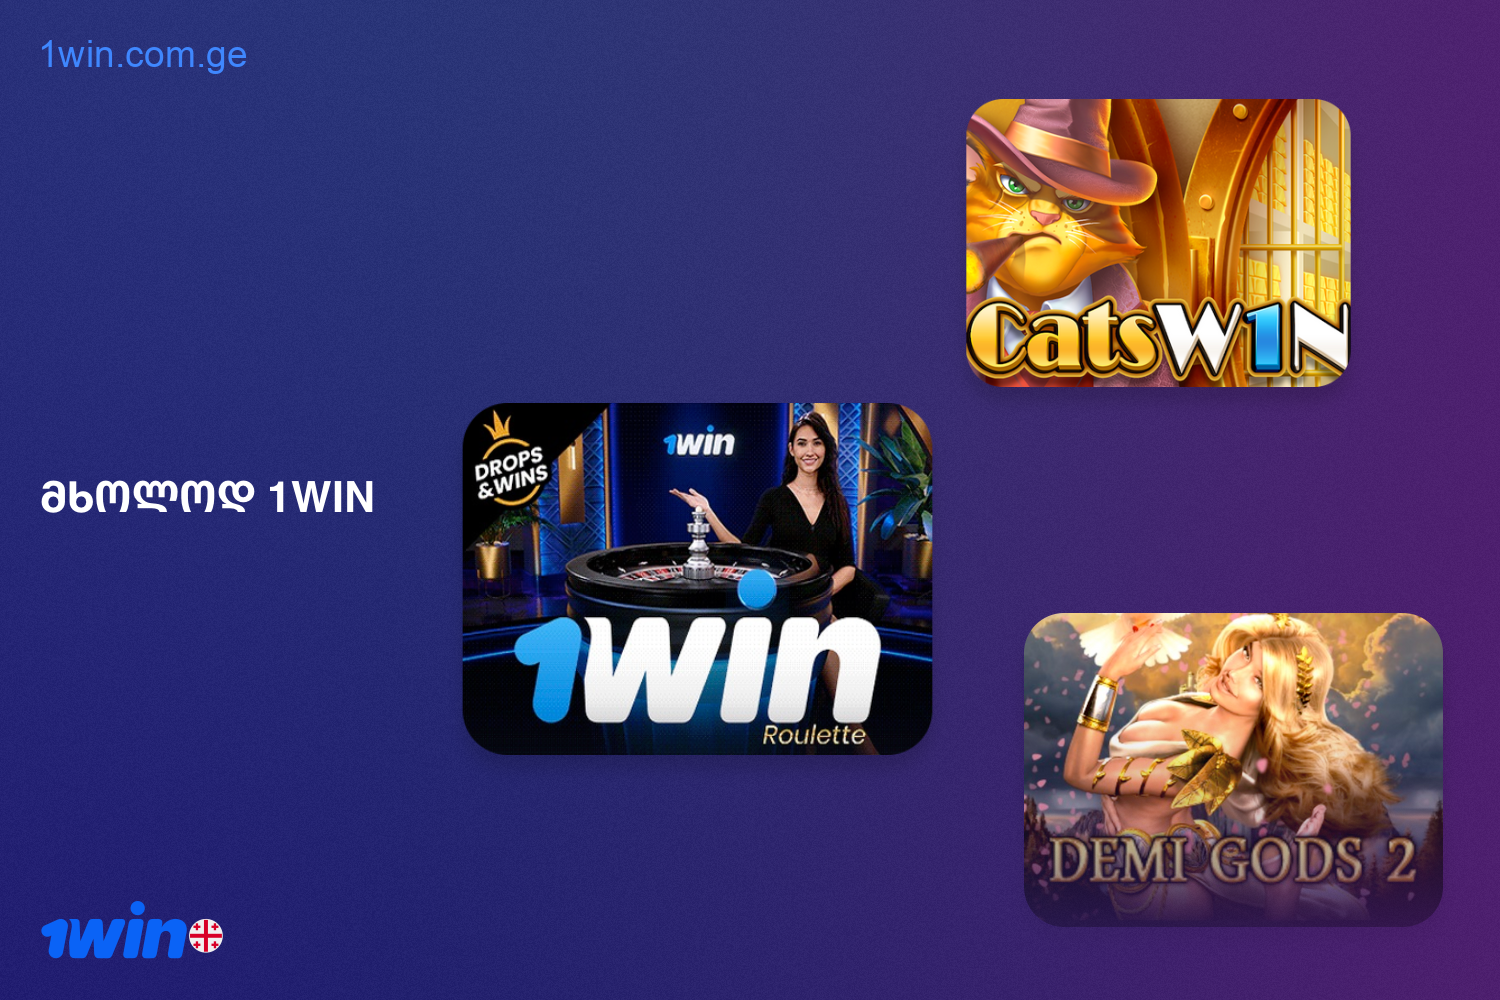 Exclusive games are available for customers from Georgia at 1win casino